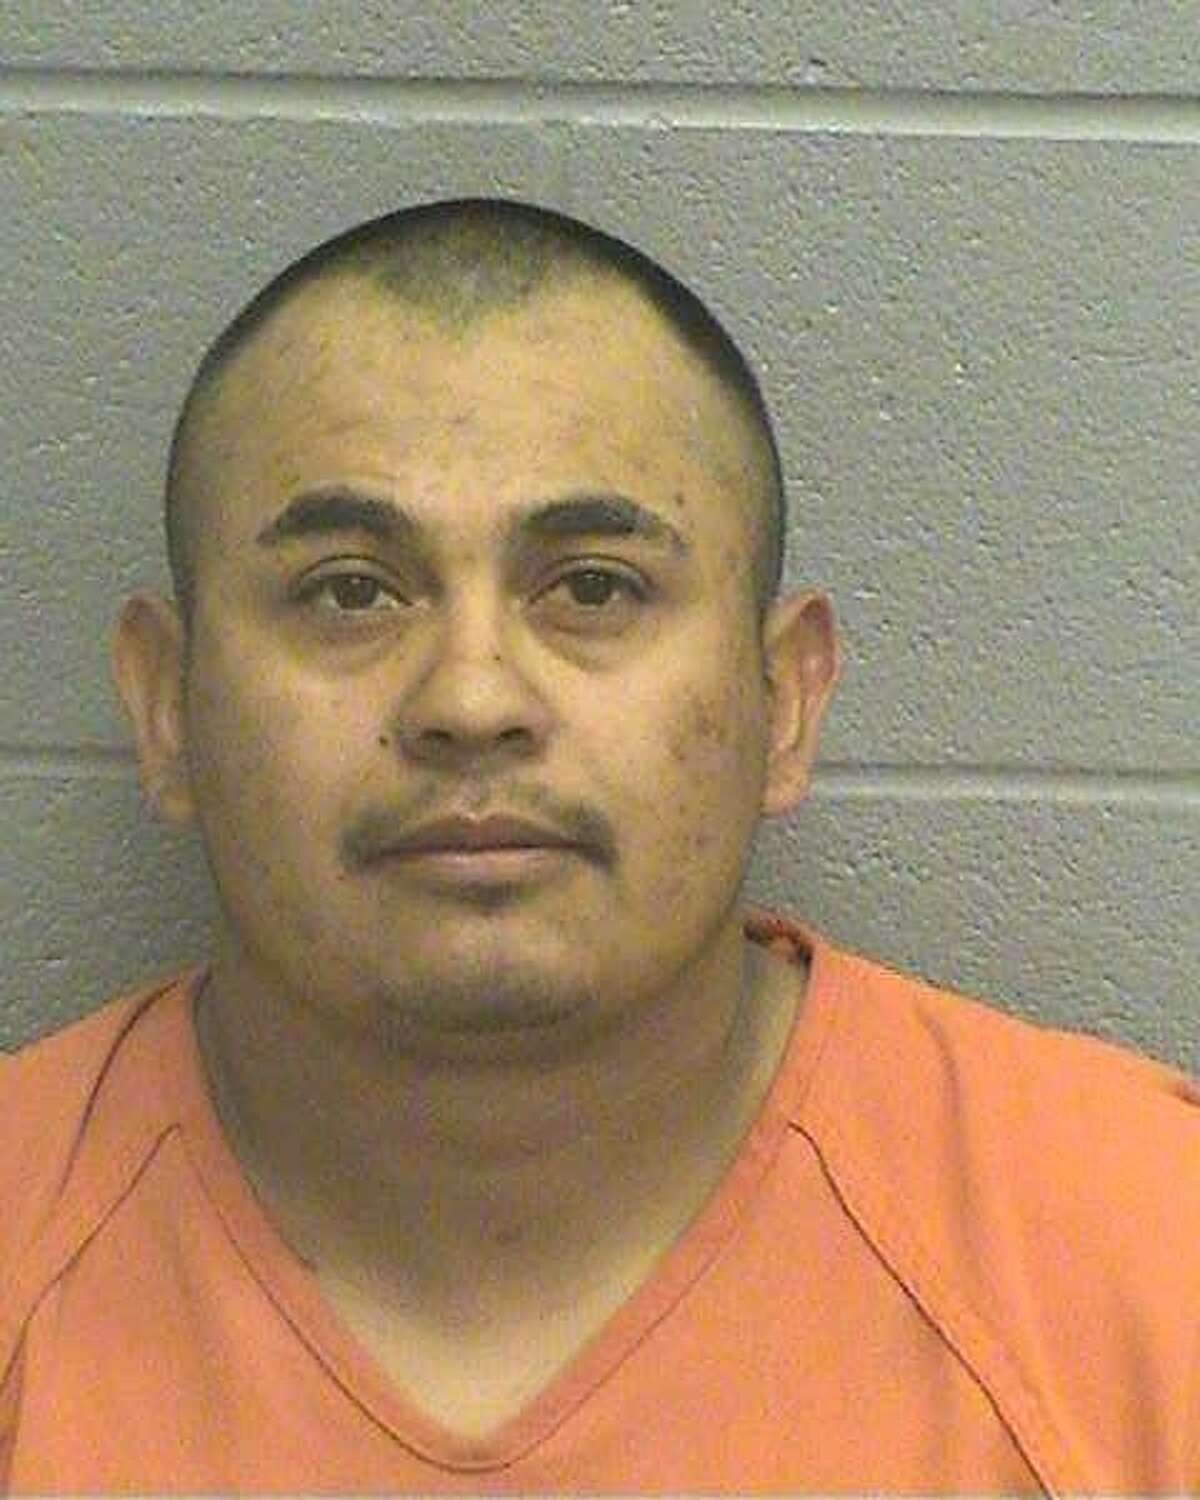 Urieal Atayde has been arrested by the Midland County Sheriff's Office as part of an alleged Texas cockfighting ring. (Source: Midland County Sheriff's Office)